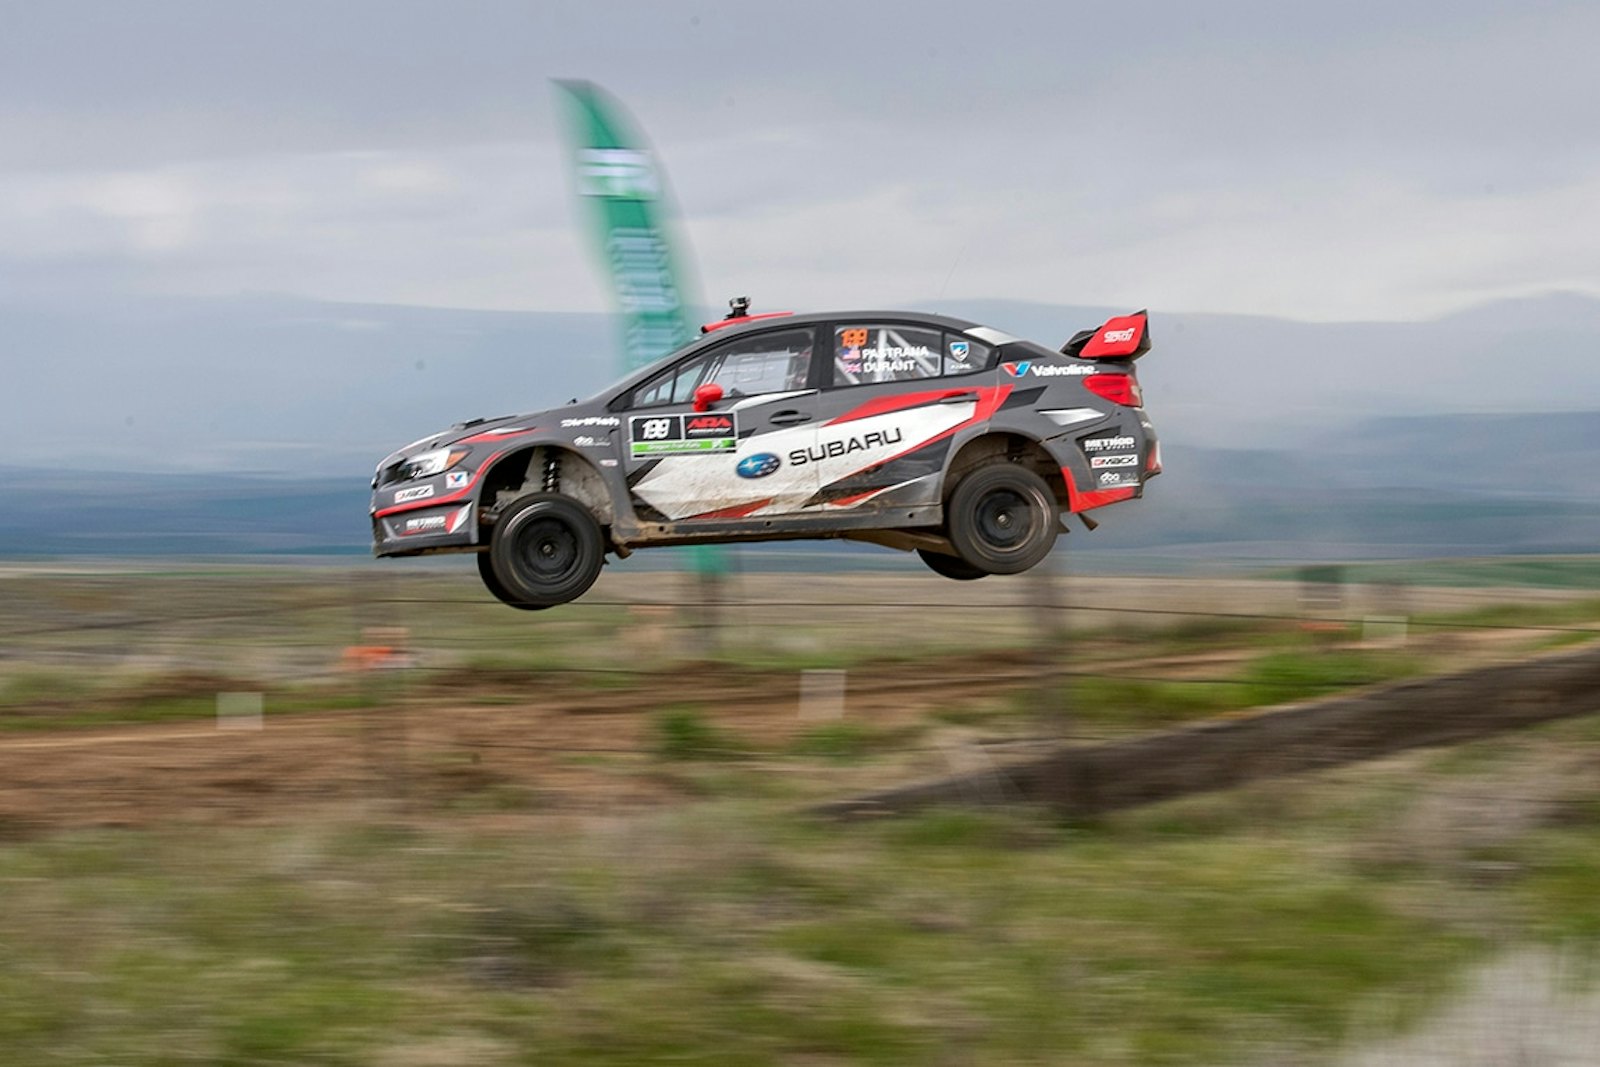 Pastrana_gets_airborne_at_the_Oregon_Trail_Rally.jpg